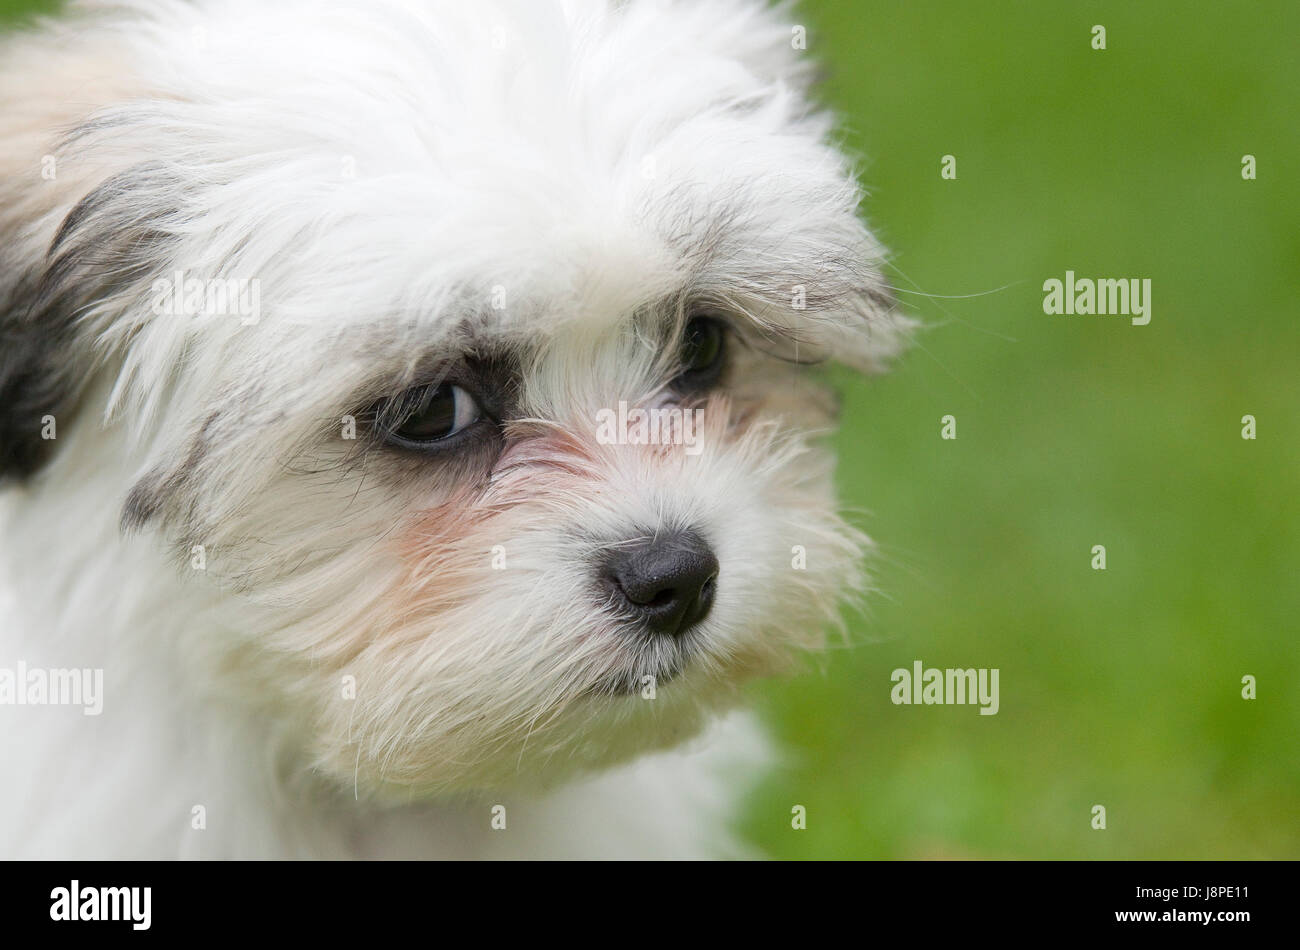 pet, portrait, pets, dog, dogs, haired, puppy, tibet, little ones, daylight, Stock Photo